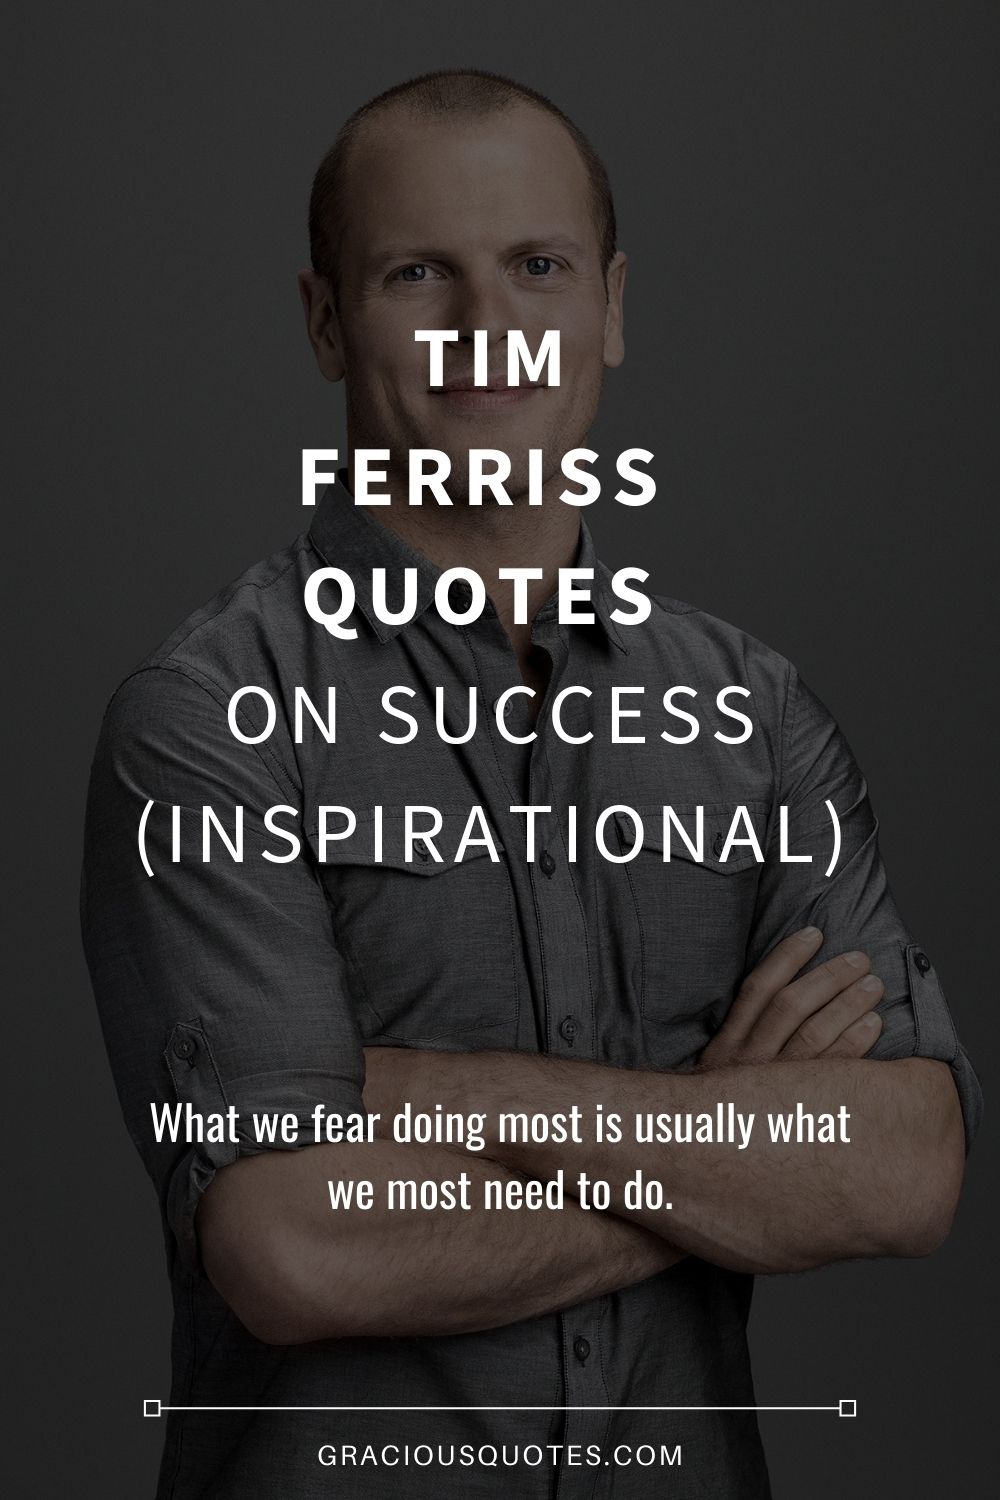 63 Tim Ferriss Quotes on Success (INSPIRATIONAL) - Gracious Quotes